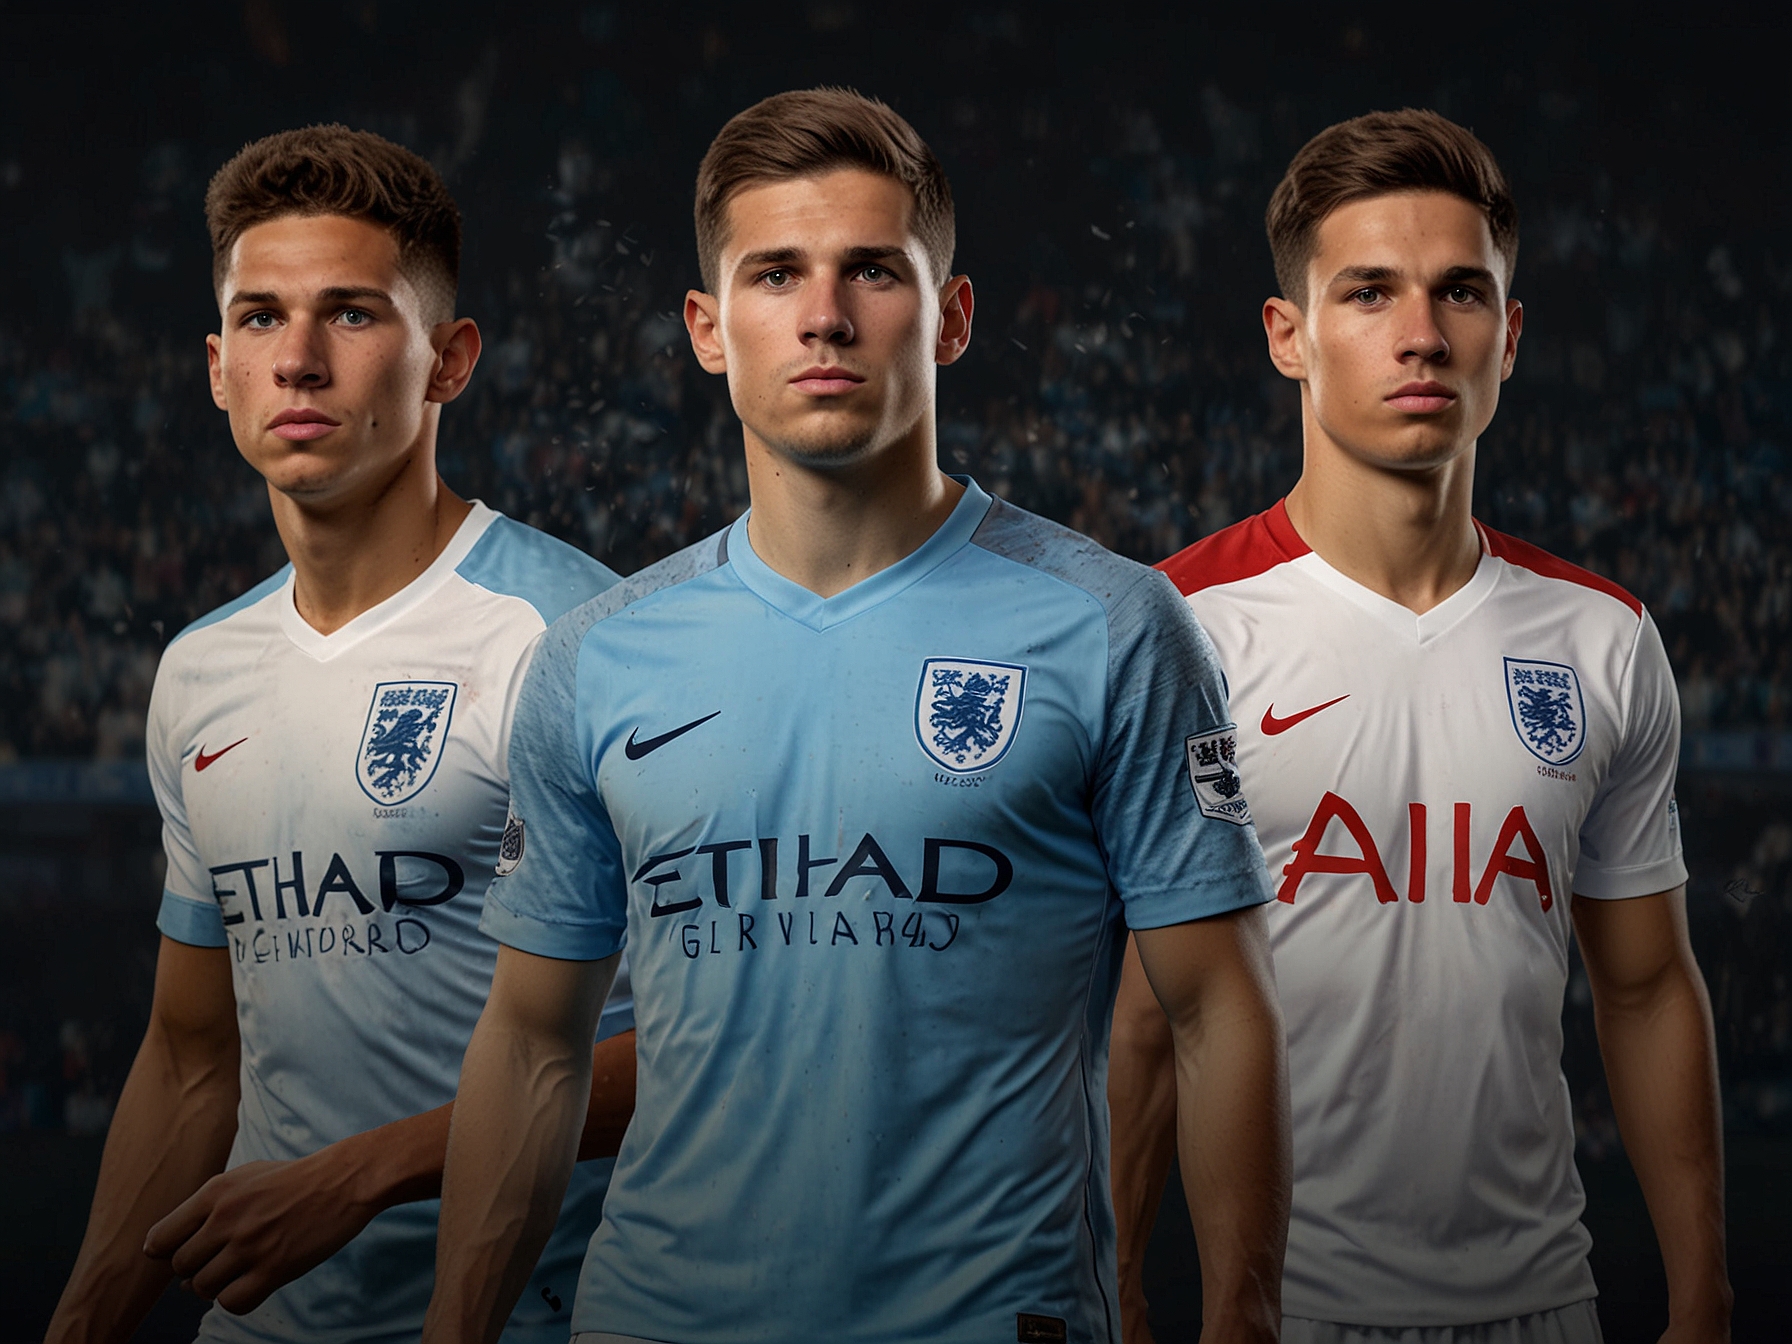 A composite image showing past and present England midfielders like Steven Gerrard, Frank Lampard, Dele Alli, and Phil Foden, highlighting the generational shifts in player personnel.